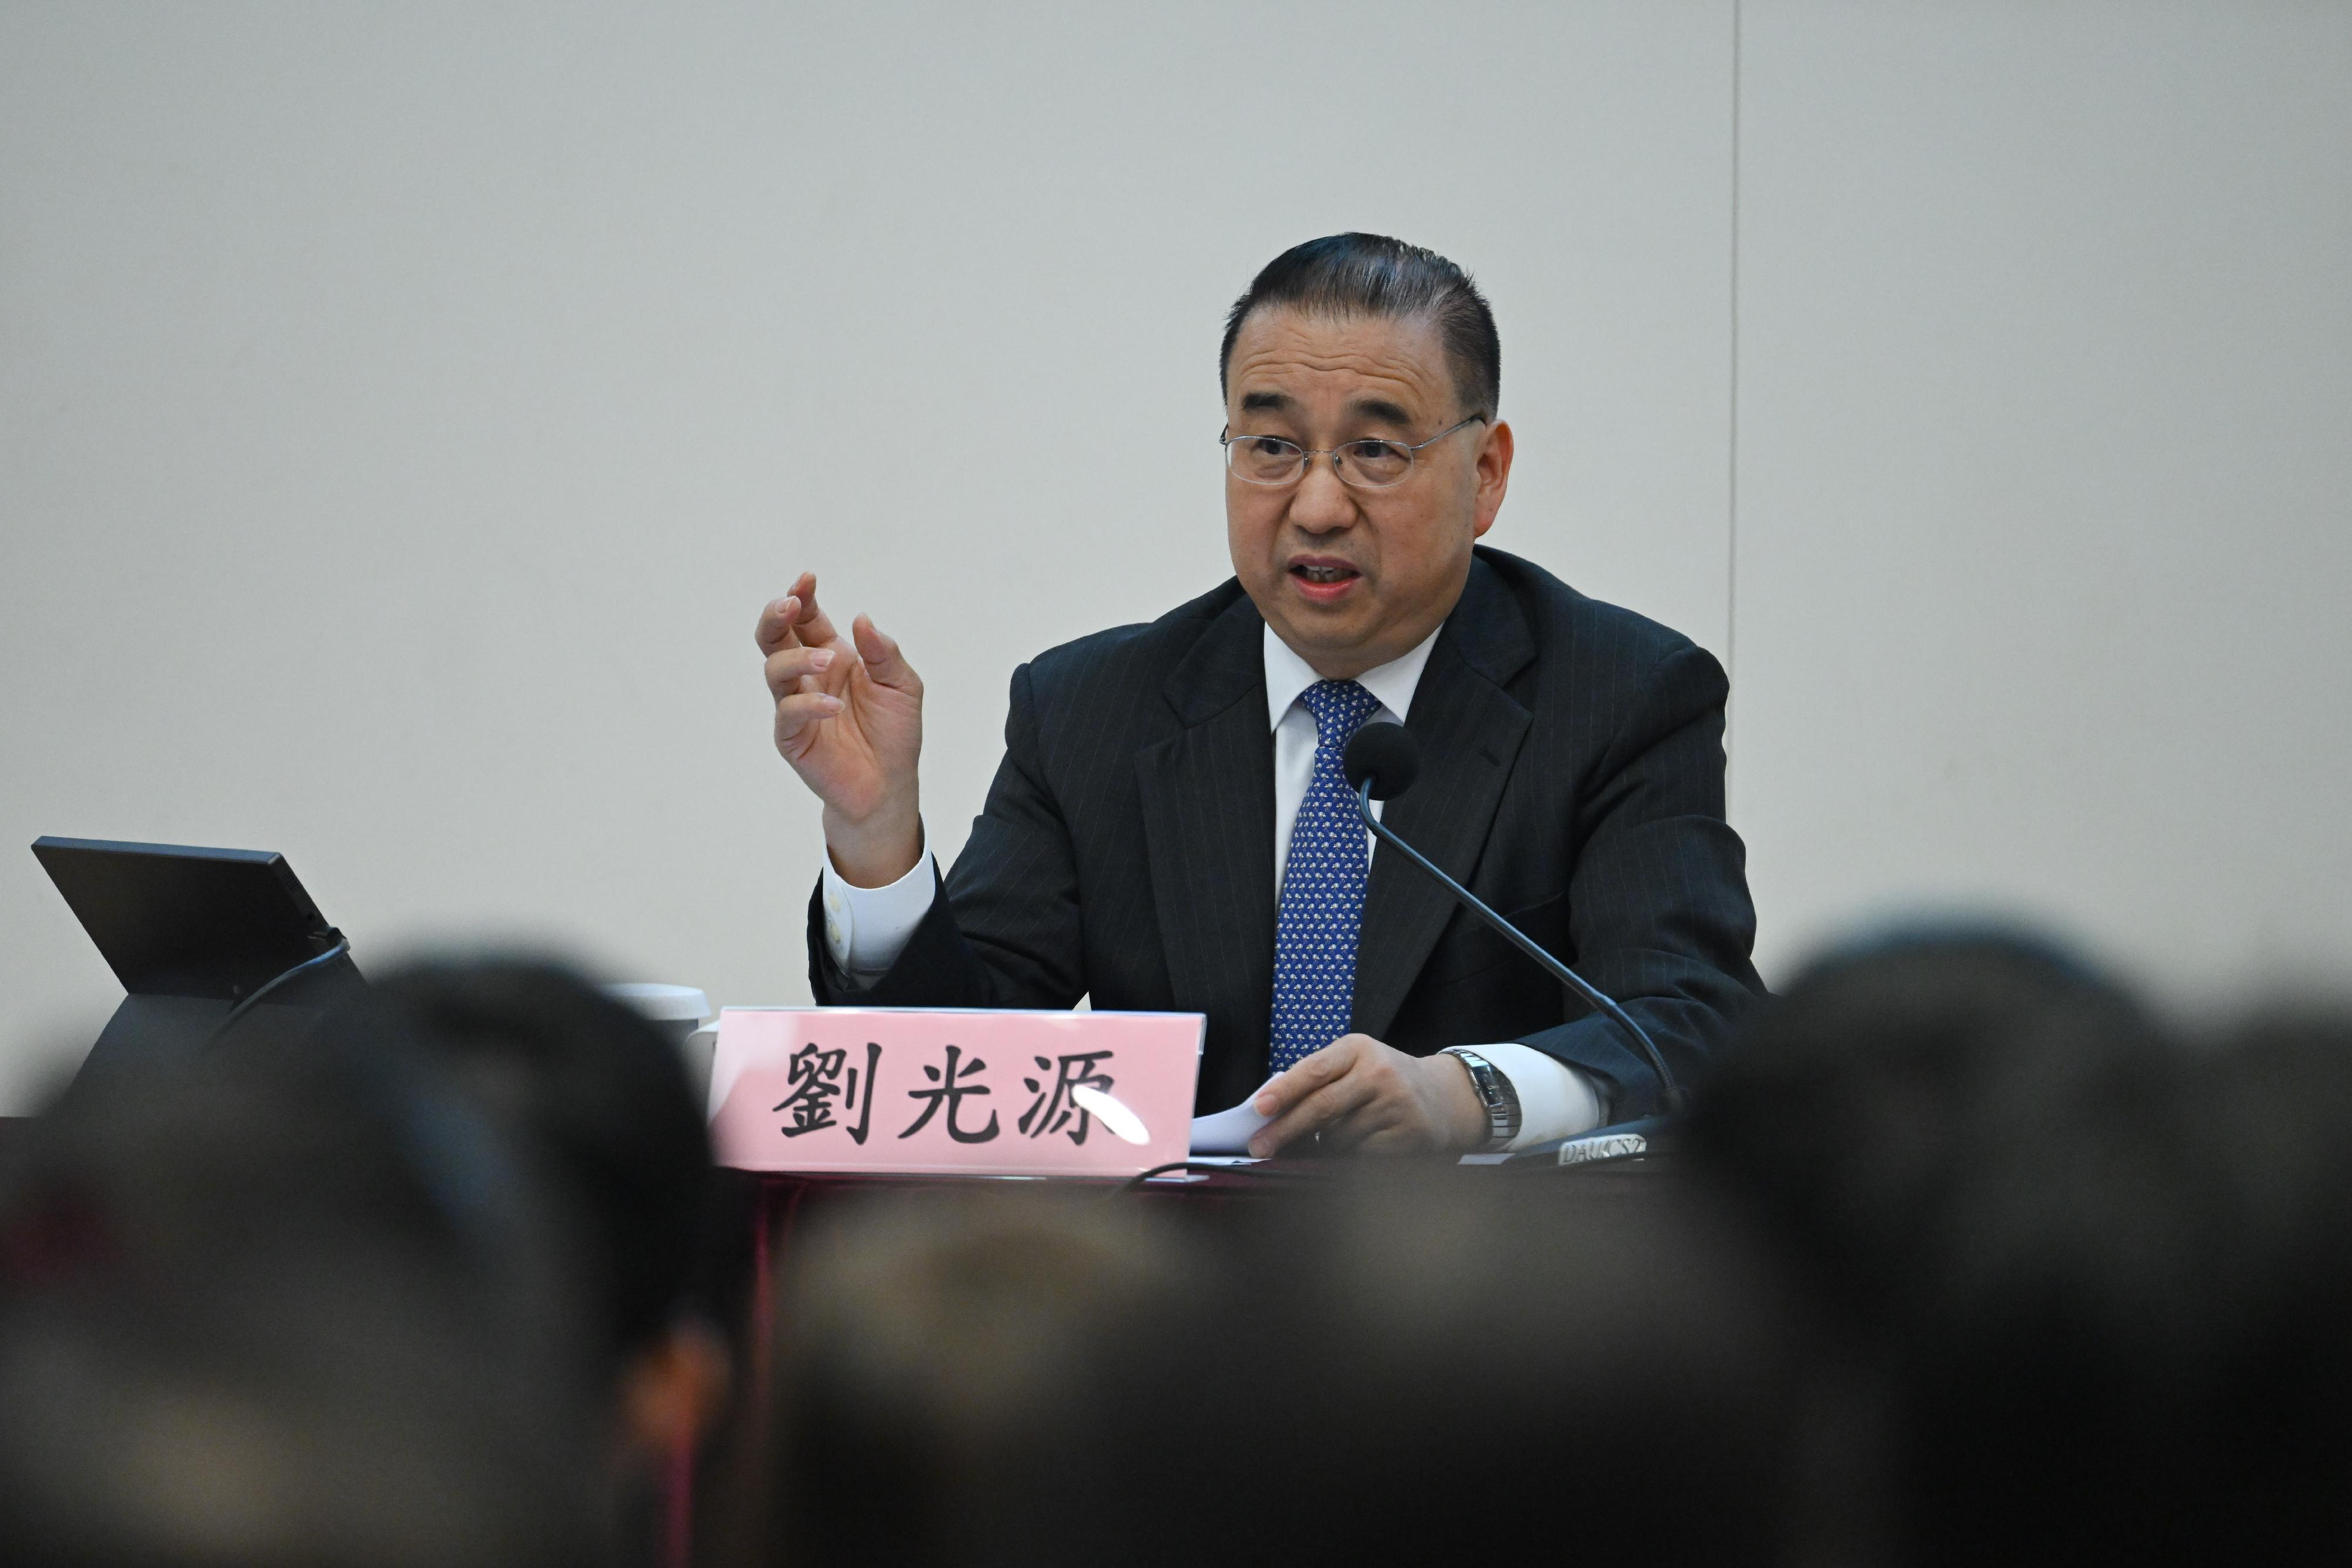 The Civil Service College today (May 31) held a thematic briefing session on "International Landscape and China’s Foreign Relations in 2023" jointly with the Office of the Commissioner of the Ministry of Foreign Affairs (OCMFA) in the Hong Kong Special Administrative Region. Photo shows the OCMFA’s Commissioner, Mr Liu Guangyuan, delivering the briefing.